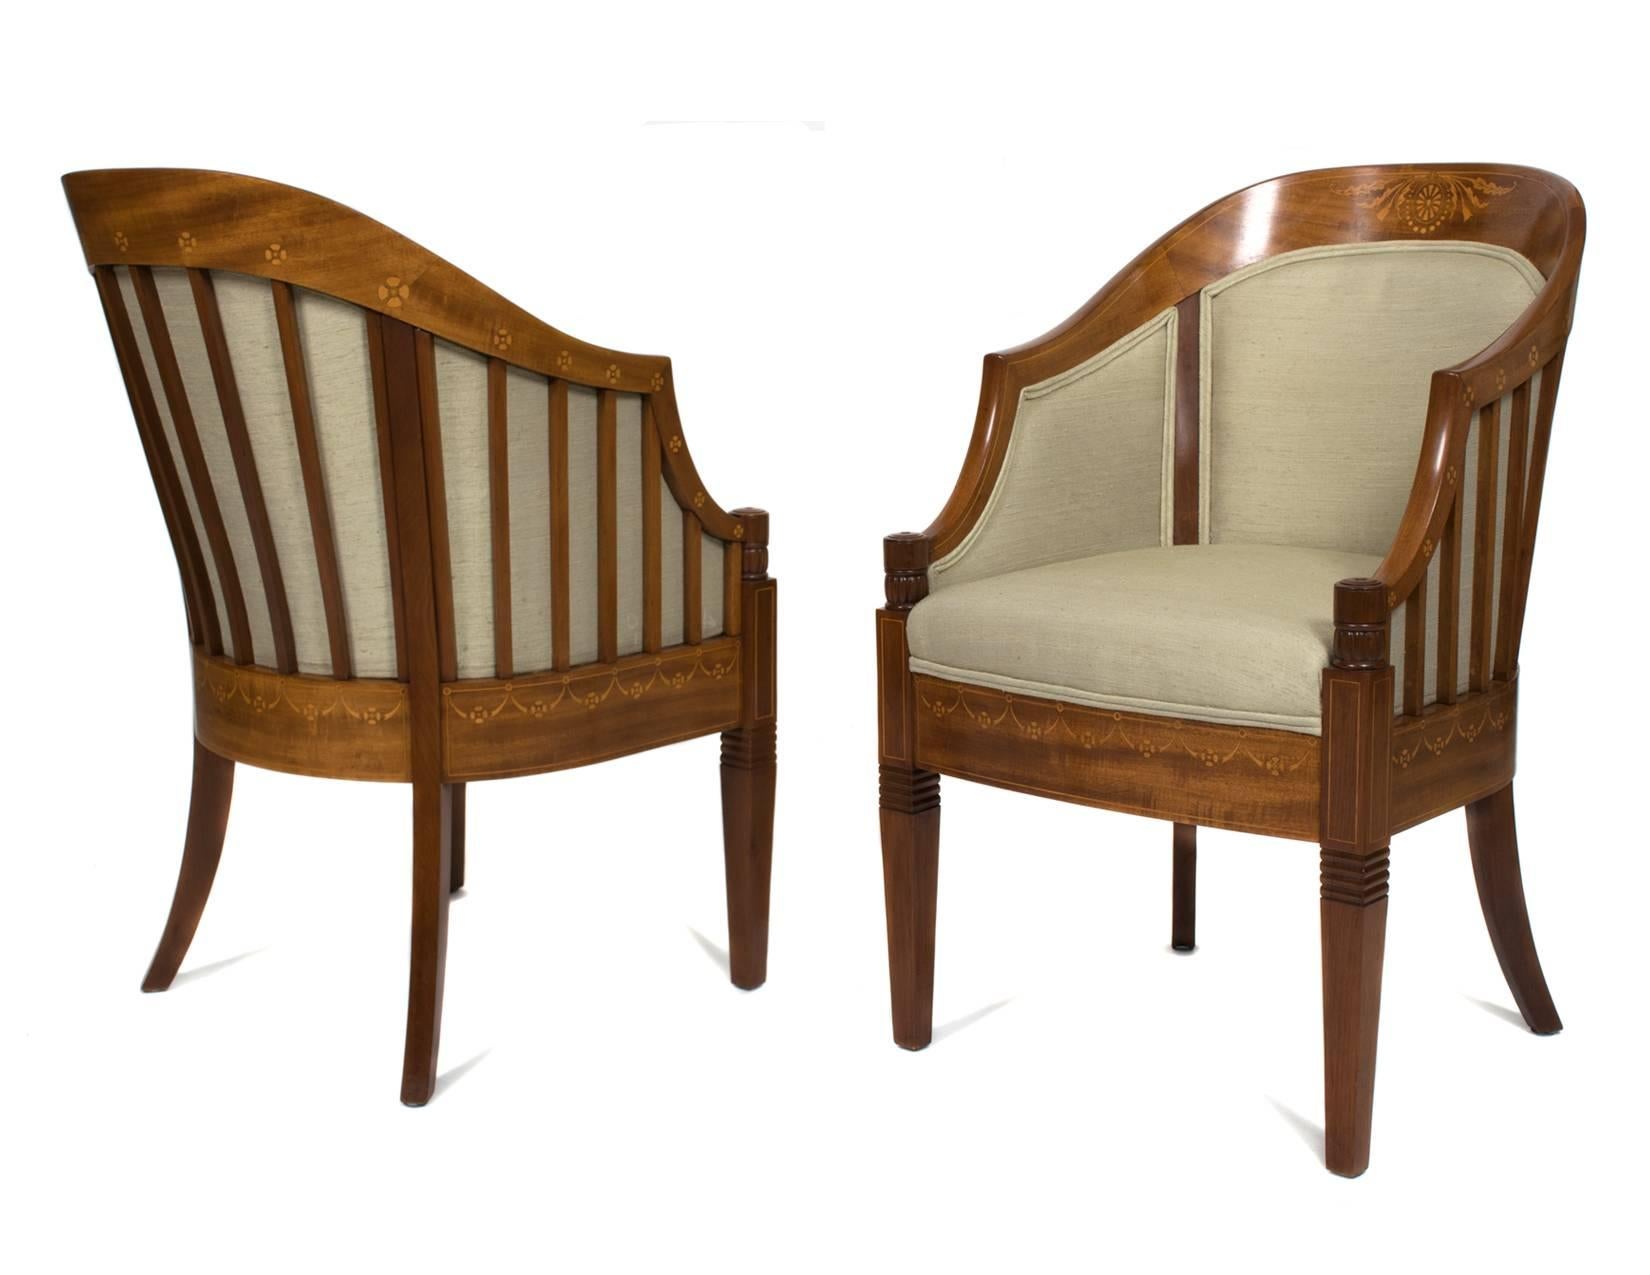 Swedish Art Nouveau Mahogany Table En Suite with Four Chairs, circa 1900 For Sale 1